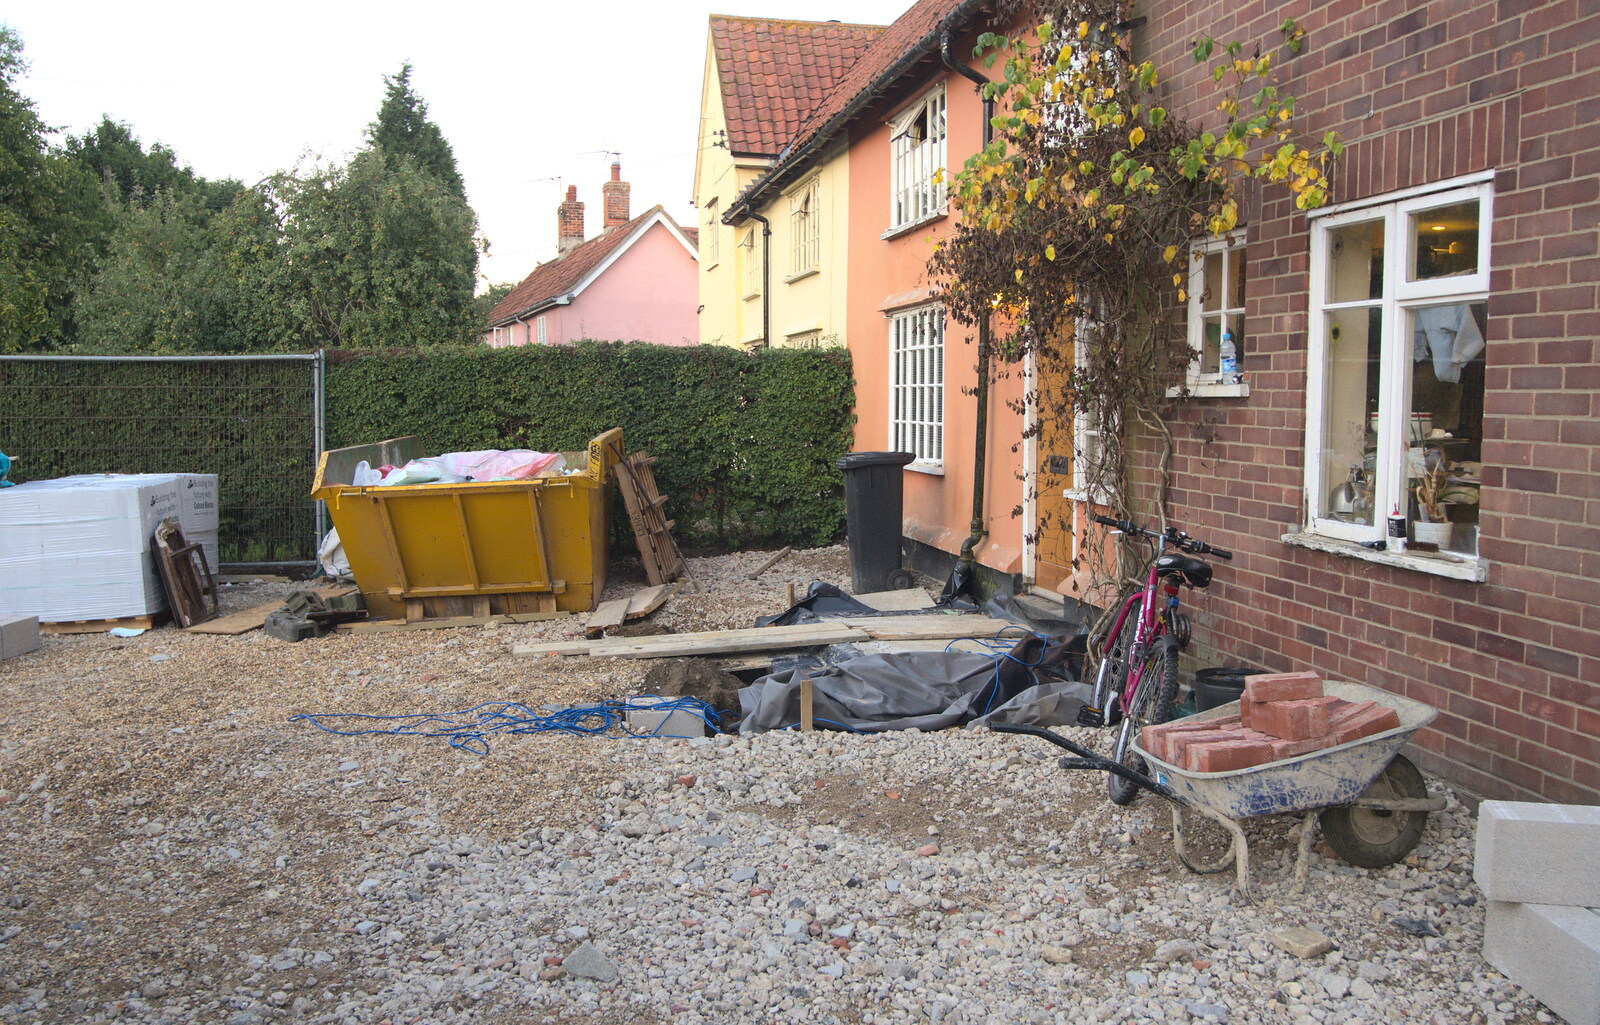 Crushed concrete and a skip from Bressingham Gardens, and Building Progress, Brome, Suffolk - 26th August 2013